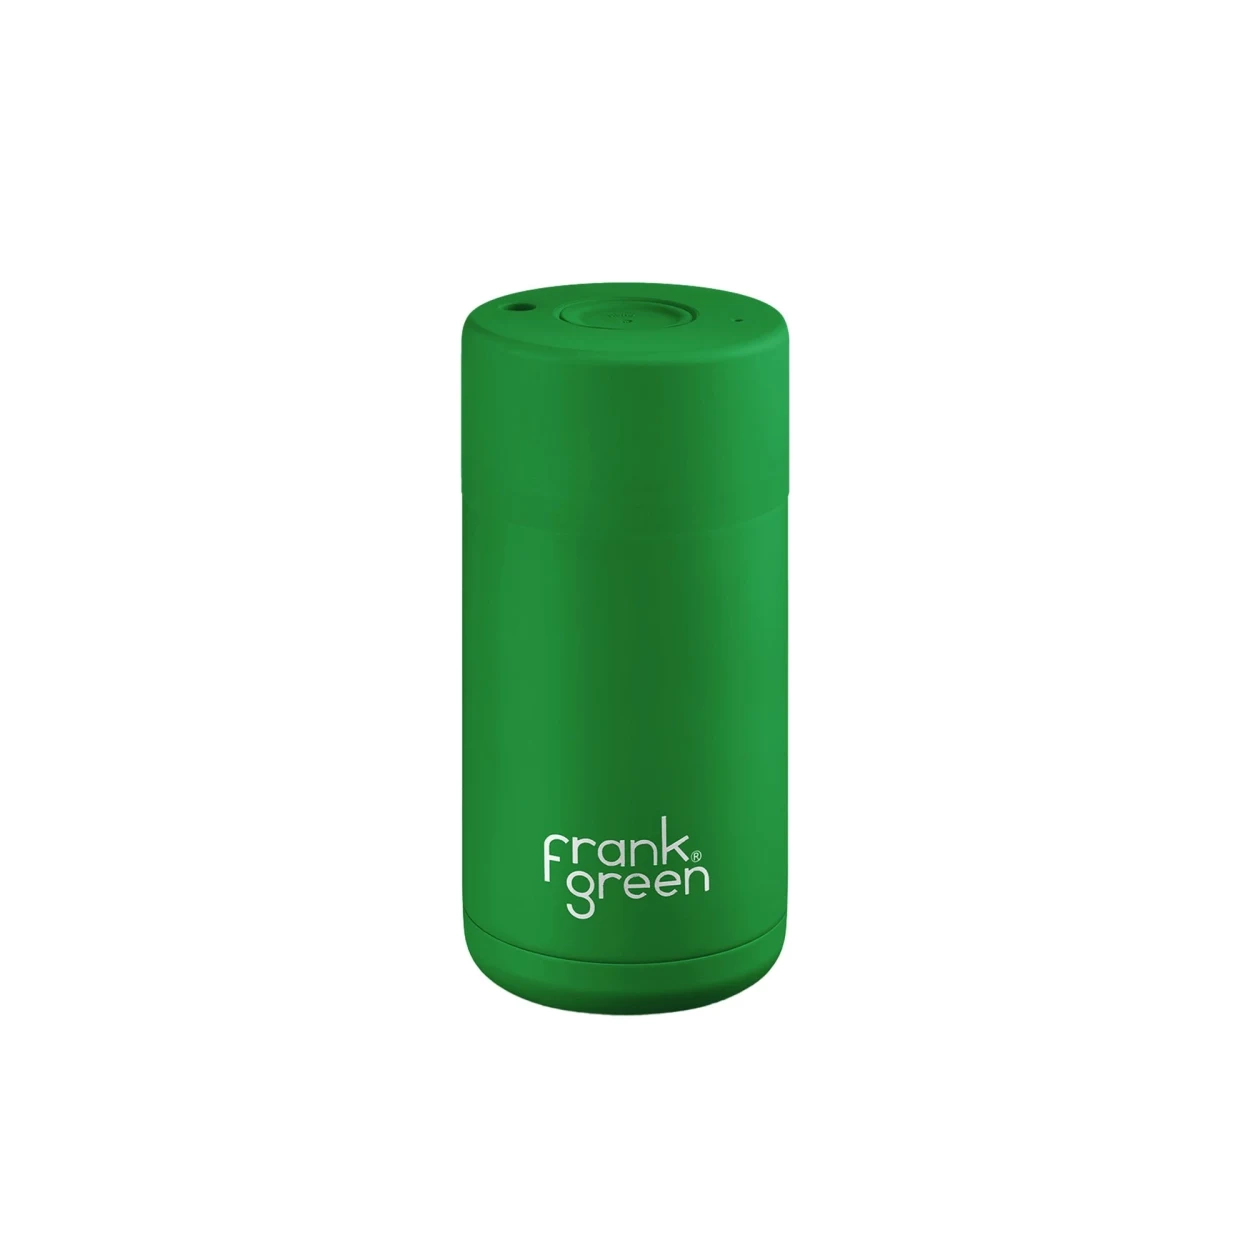 Frank Green Limited Edition Reusable Cup 355ml (12oz) Evergreen Image 1